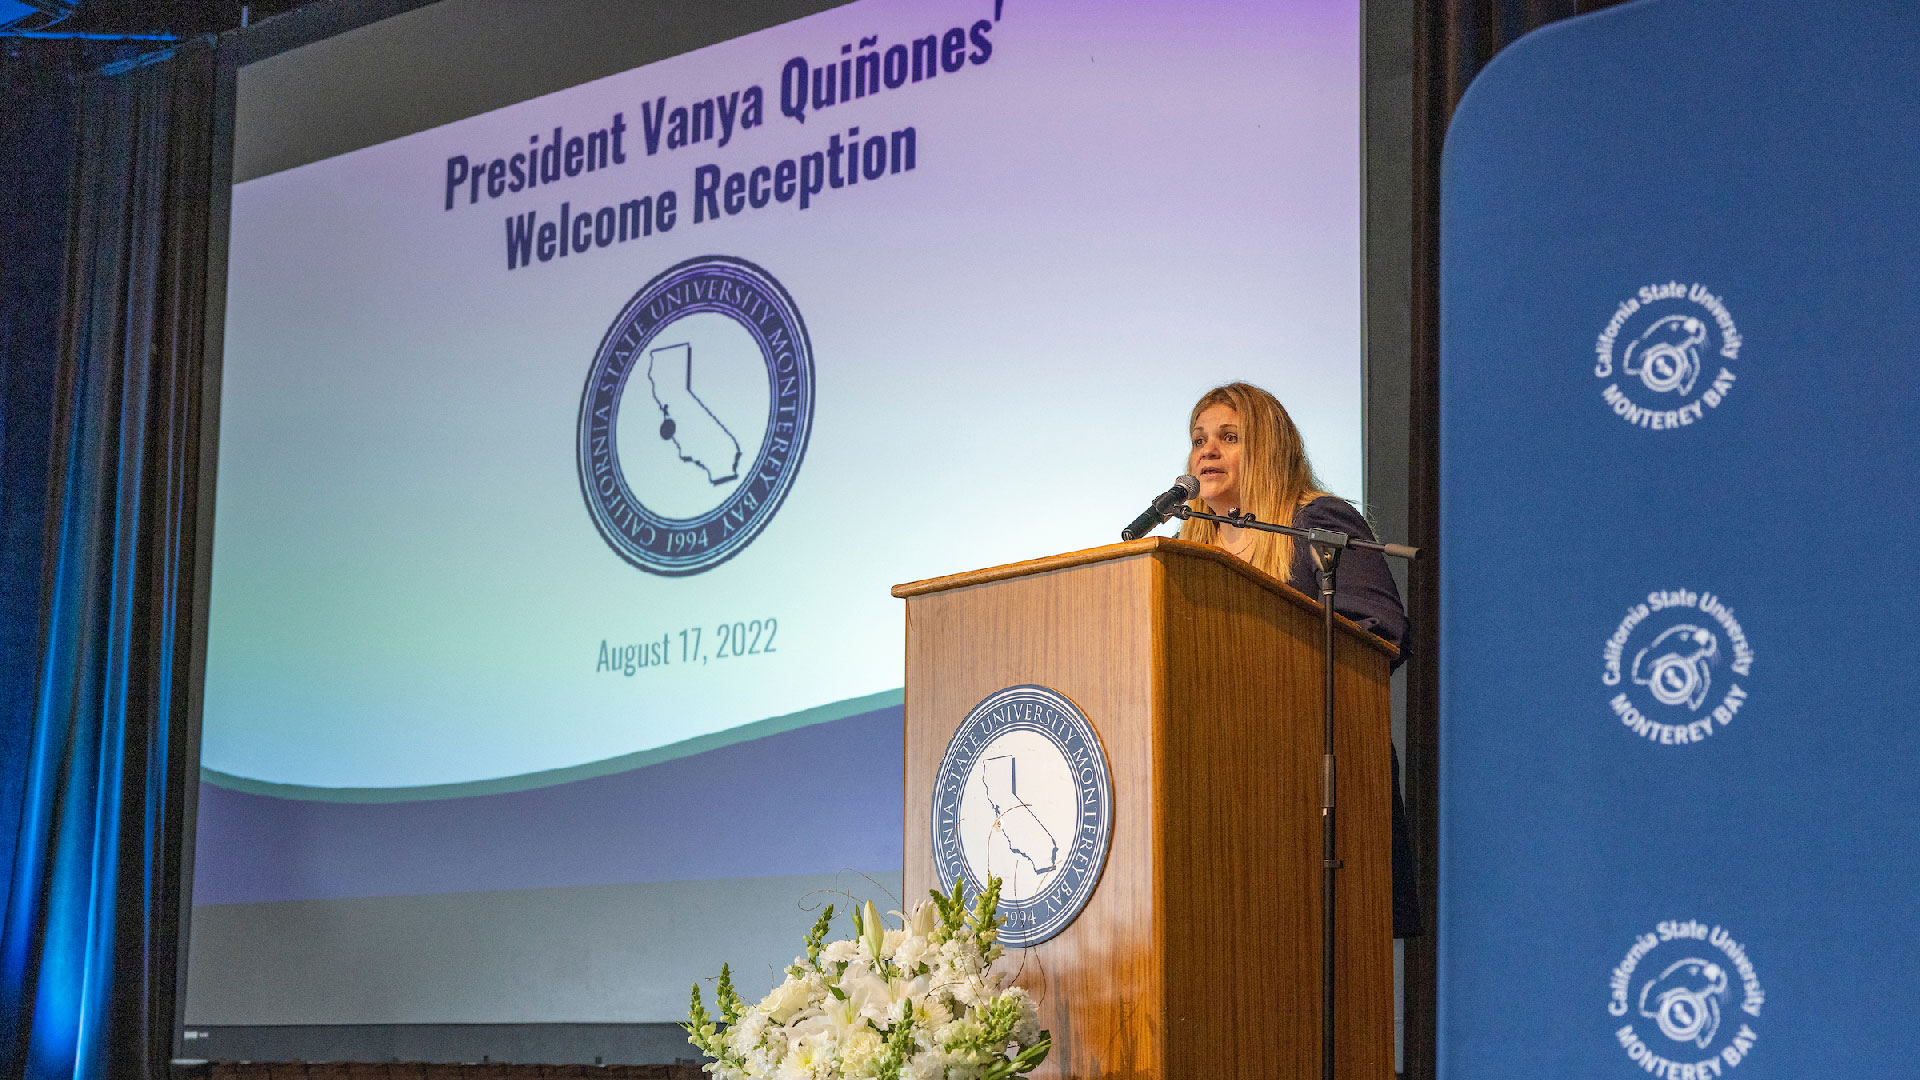 President Quiñones speaking at the podium at the Employee Welcome Reception